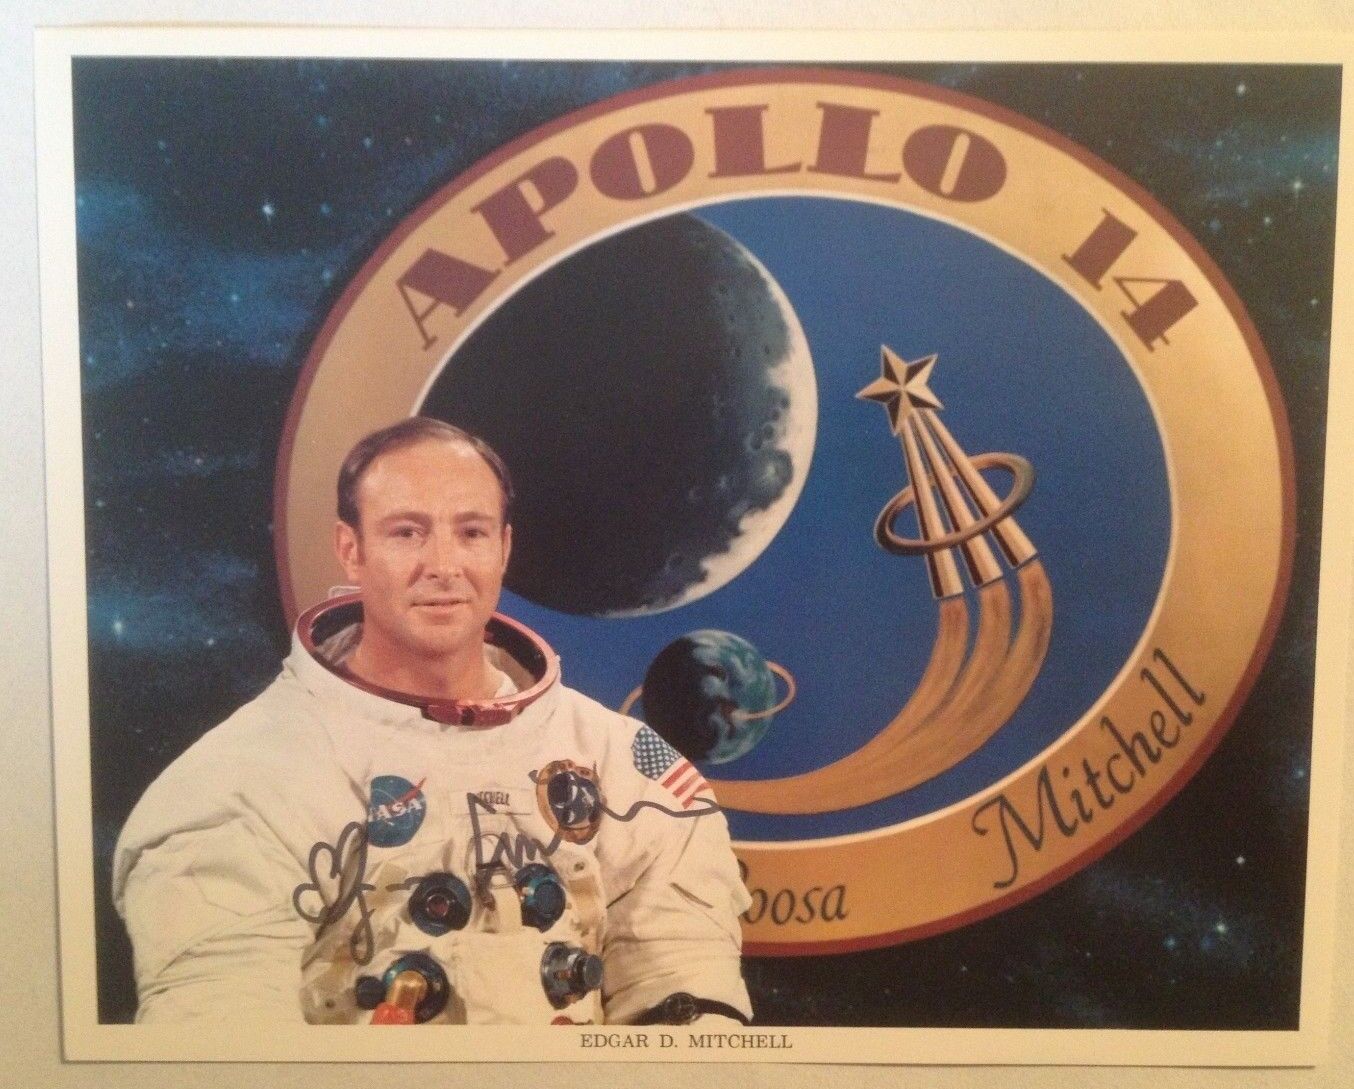 Astronaut Edgar Mitchell Autographed Official NASA Apollo 14 Mission Photograph